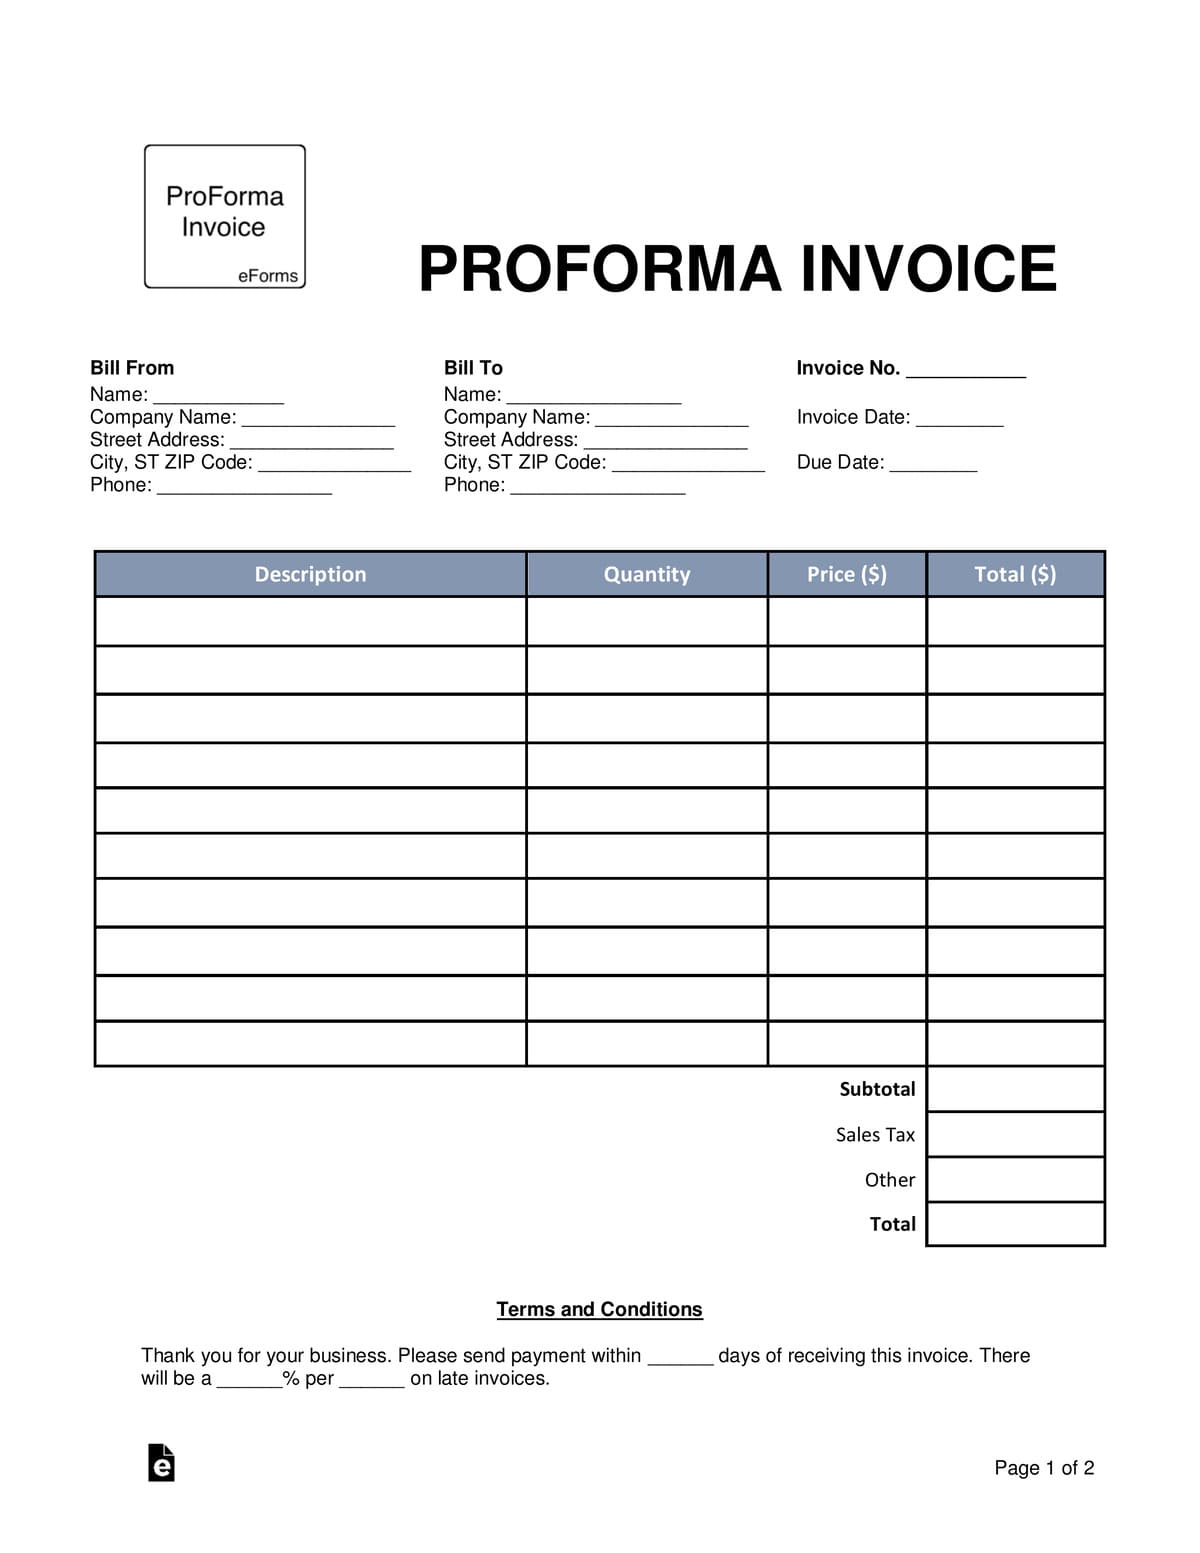 Invoice form - DiFFreight